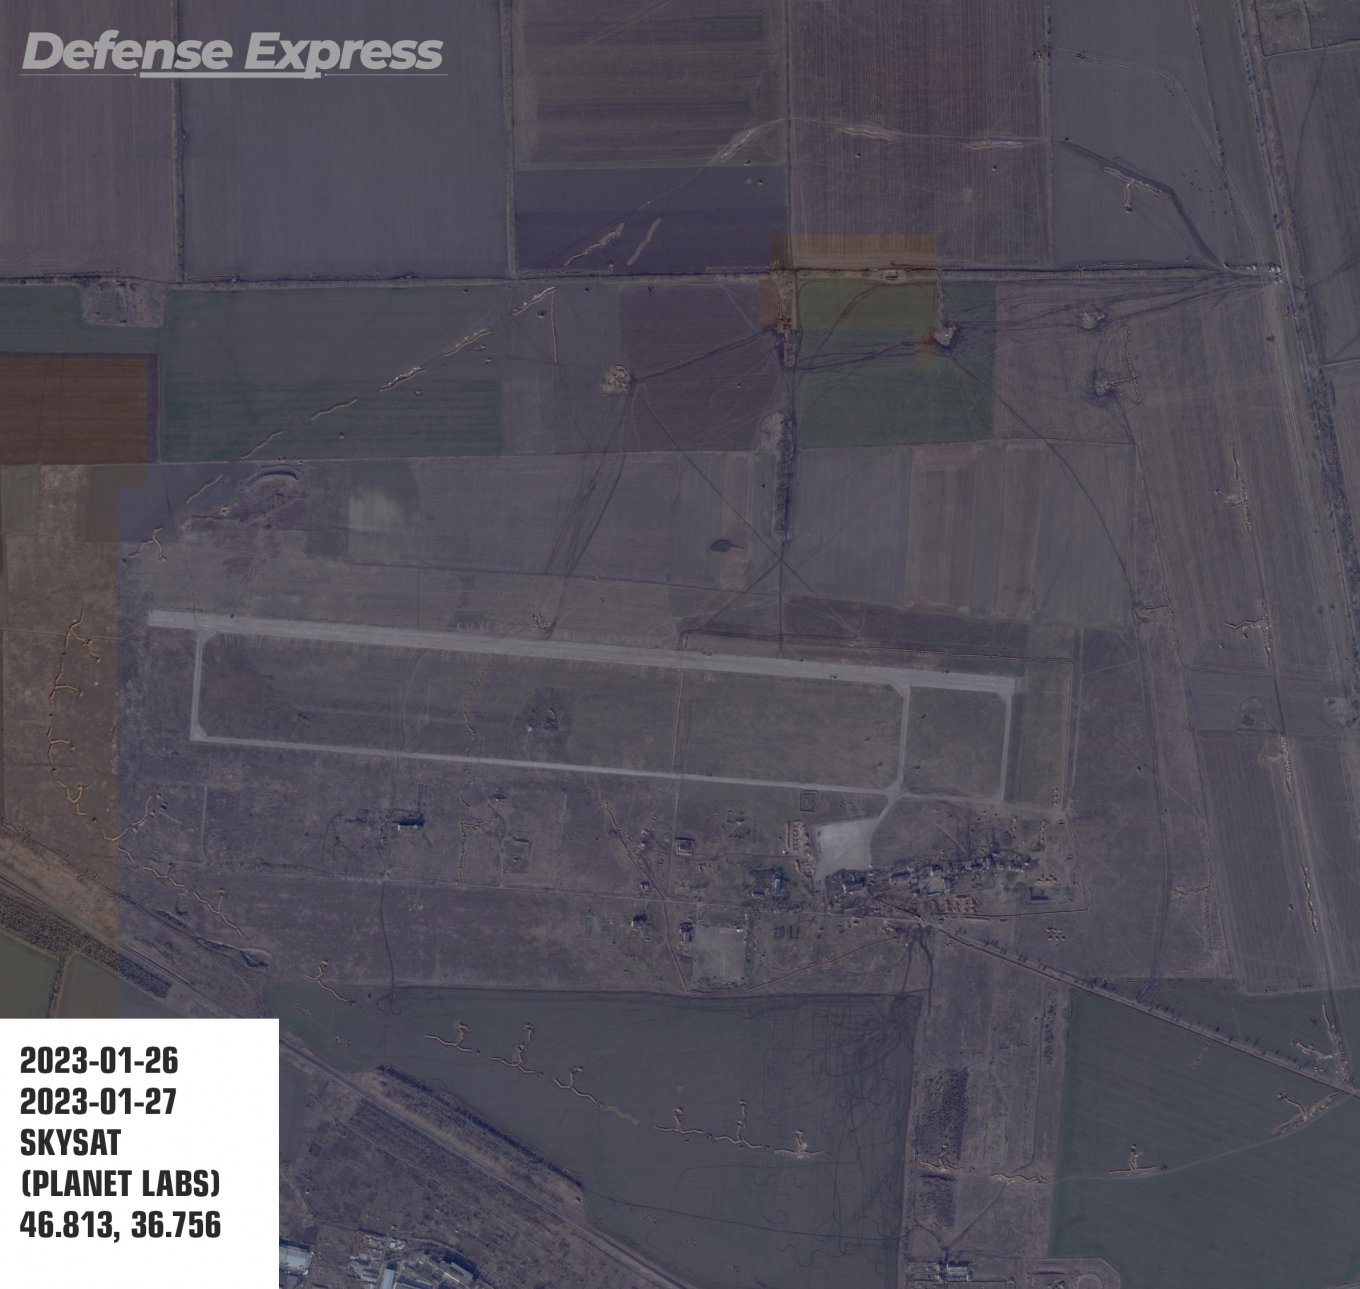 Russians Preparing the Airfield In Occupied Berdyansk For a Circular Defense: Three Rows of Wagner Pyramids And 15 Km of Fortifications, Defense Express, war in Ukraine, Russian-Ukrainian war